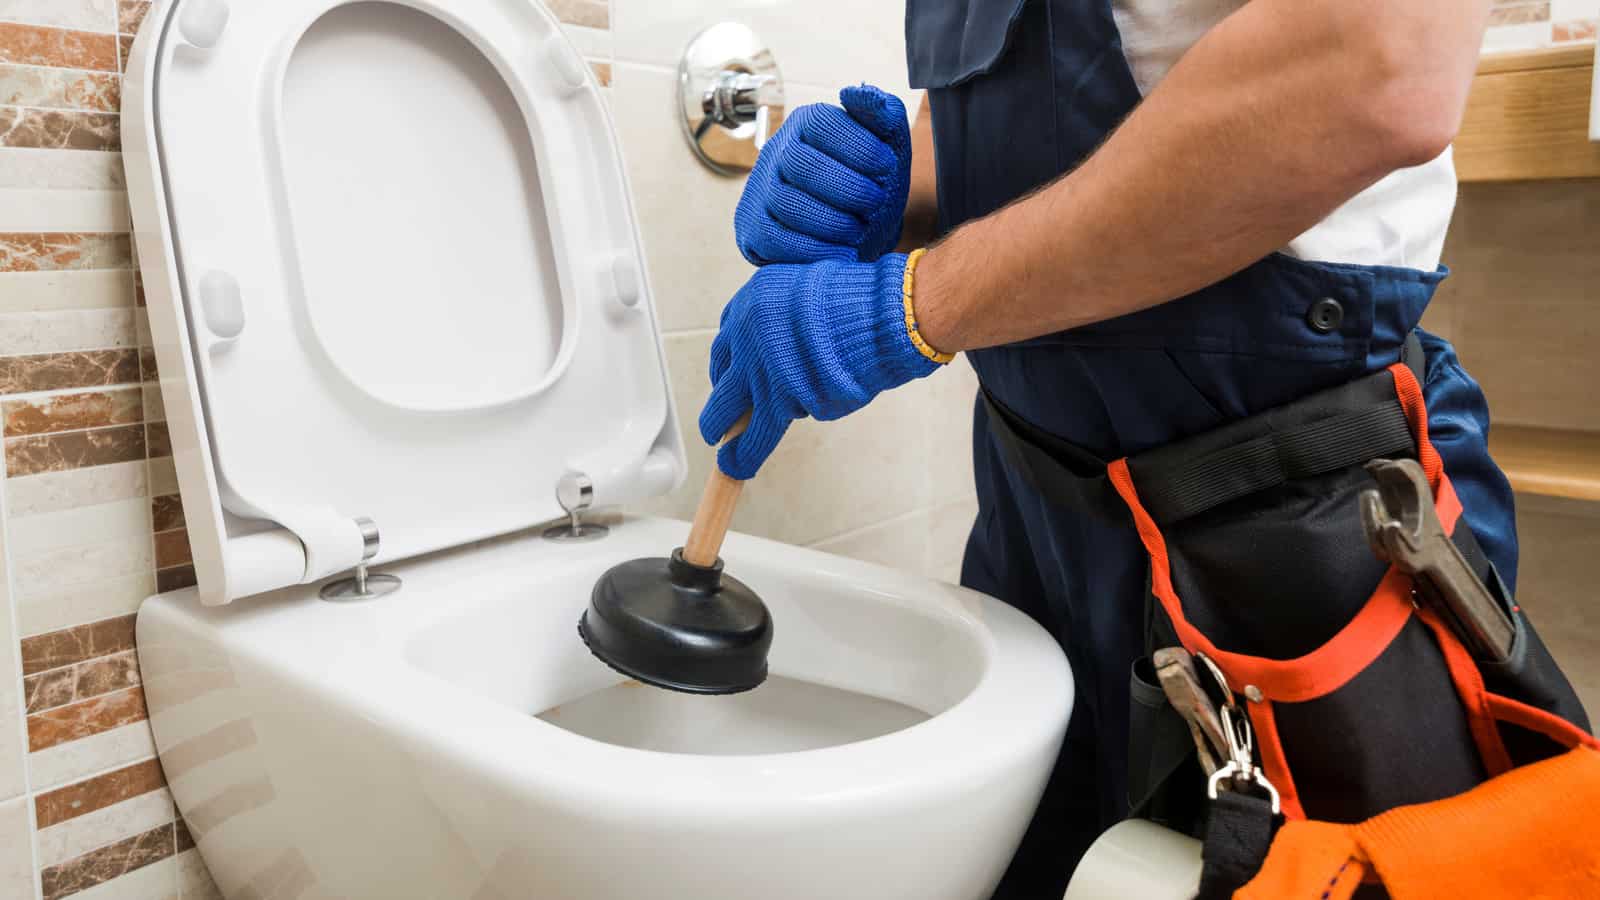 Roto-Rooter Plumbing & Drain Services of Tucson